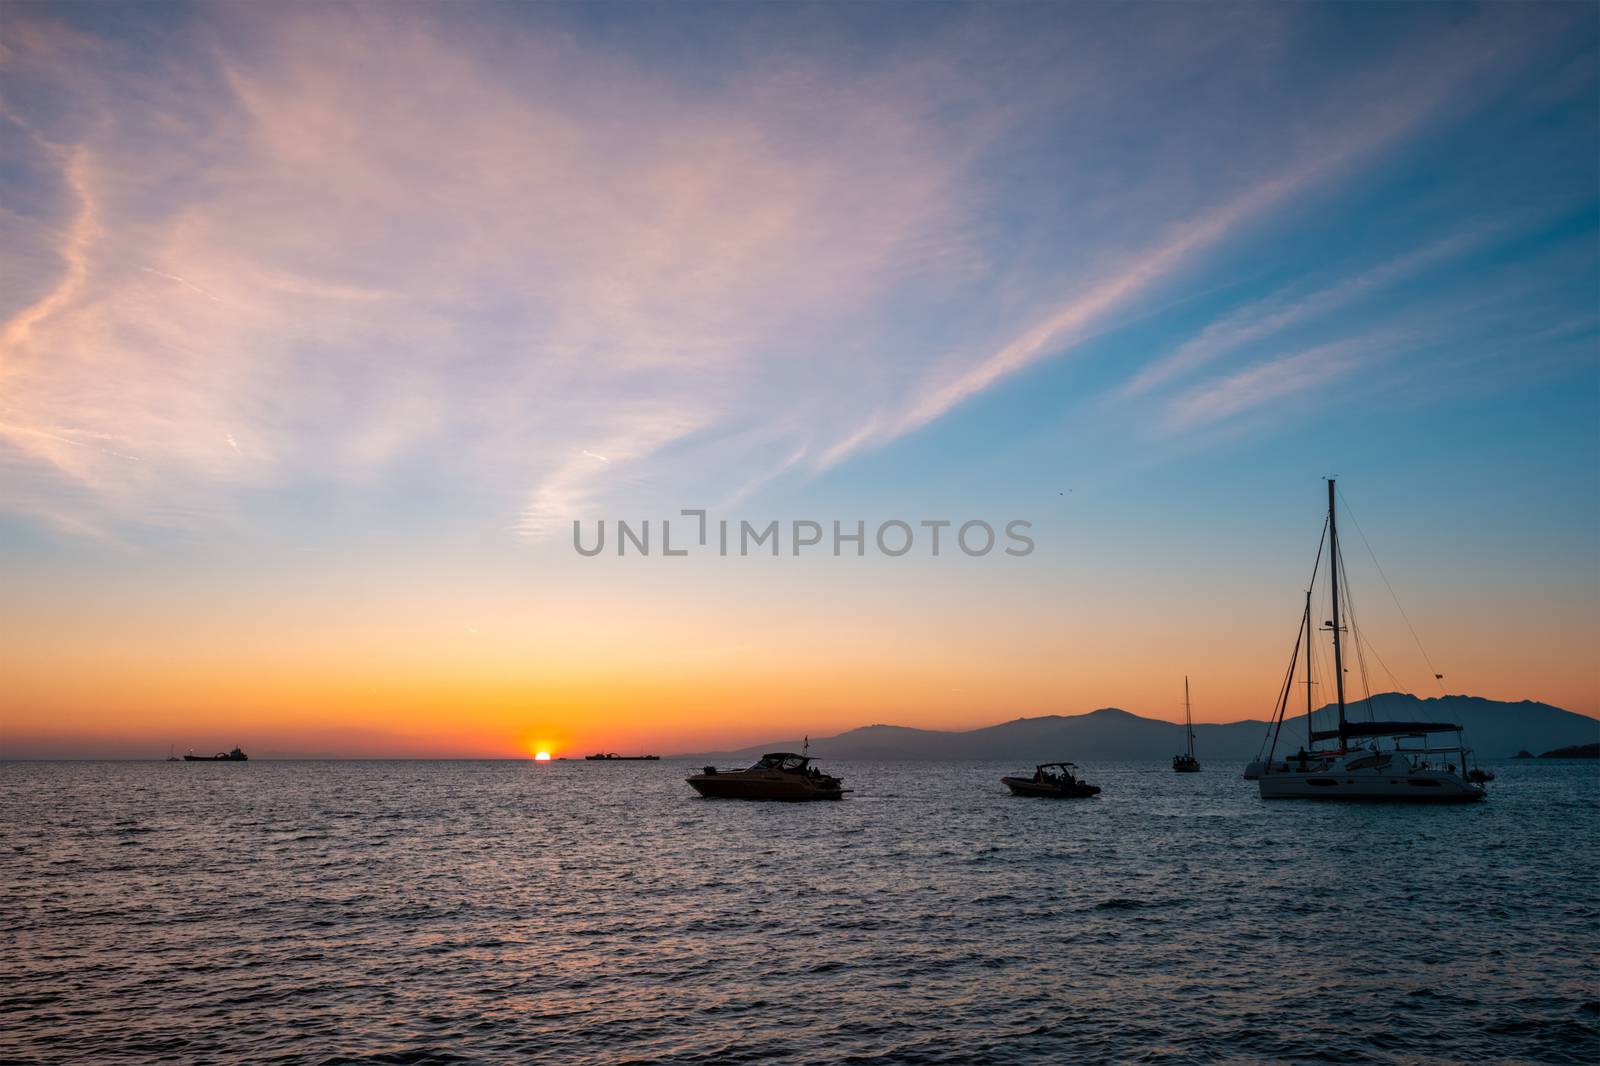 Sunset in Mykonos, Greece and yachts in the harbor by dimol